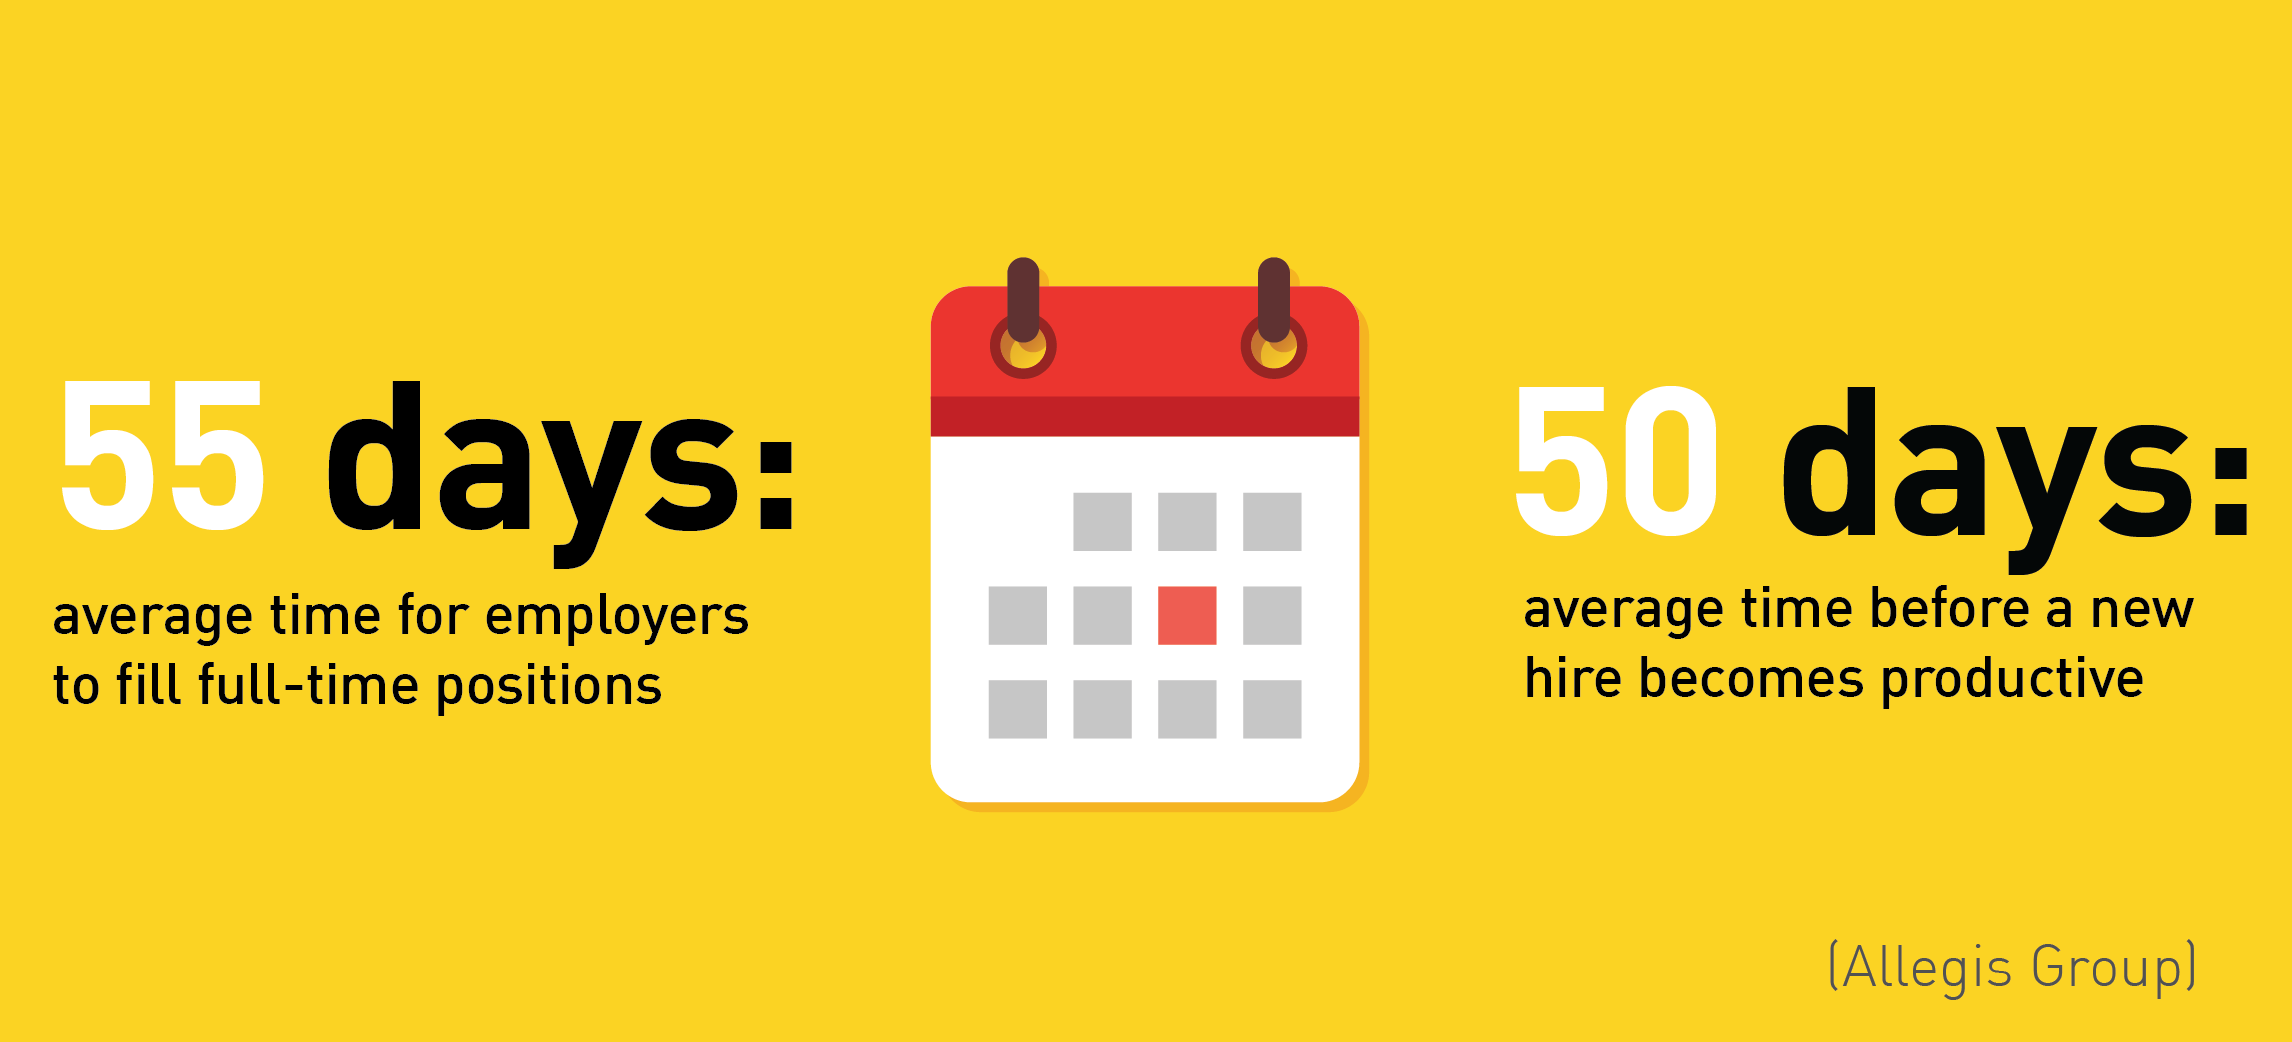 it takes 50 days for an employee to become productive 